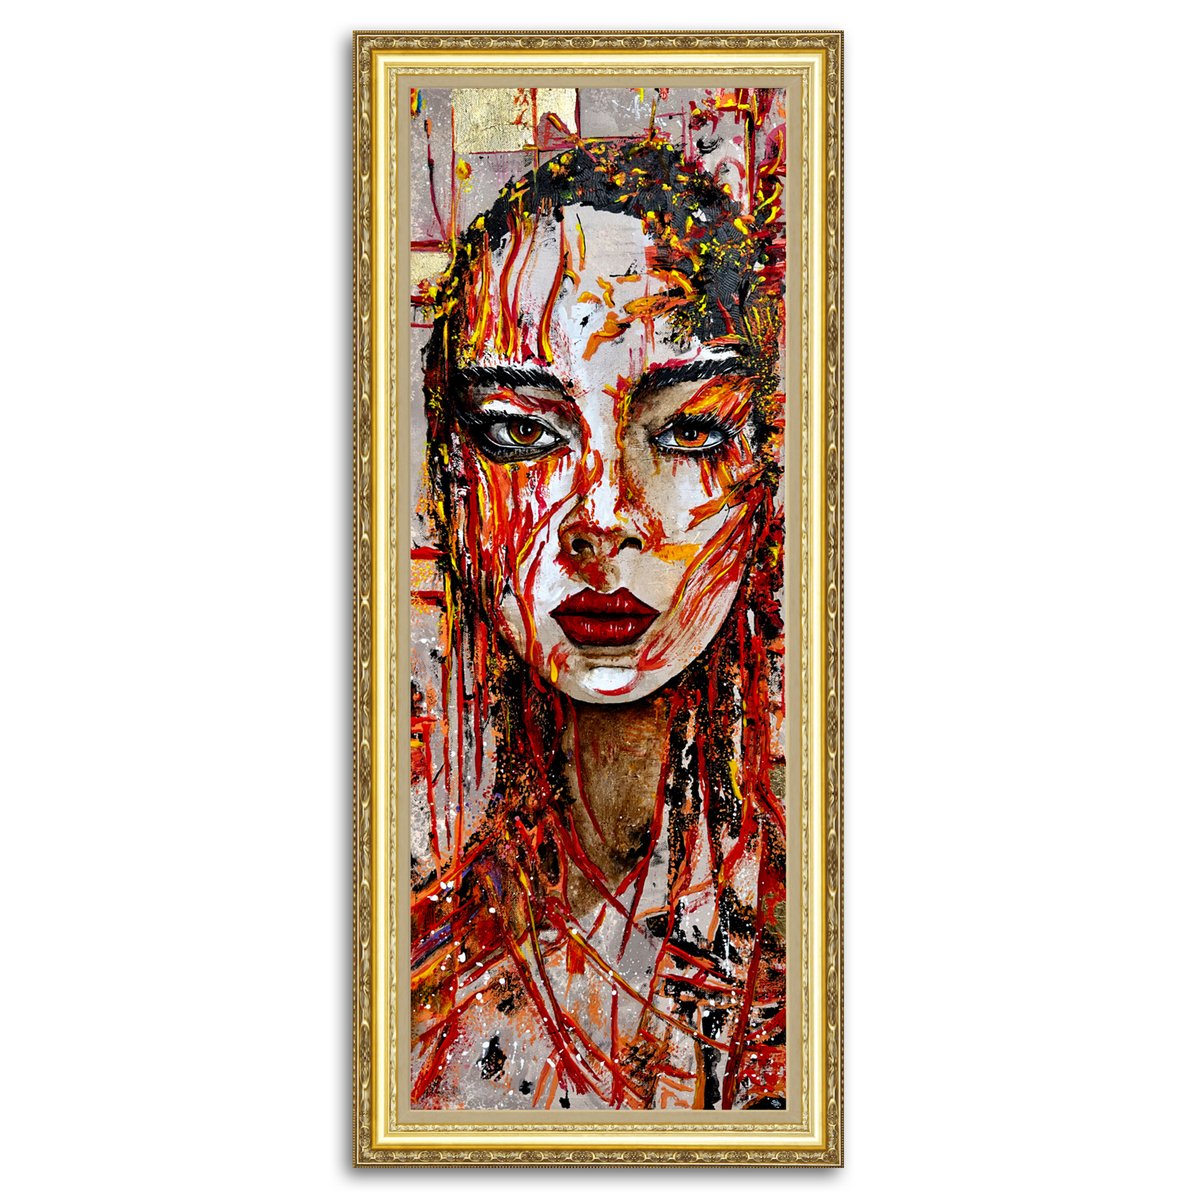 Fluid Femme
artcursor.com/products/fluid… 
#ContemporaryArt #AbstractPortraits #ColorfulExpressions #ArtisticVisions #VibrantEyes #DynamicMovements #LuxuriousDetails  #ExpressiveBrushstrokes #GoldenTouches #ArtCollector #art #AbstractMasterpiece #ElegantArtwork #abstractart #luxary